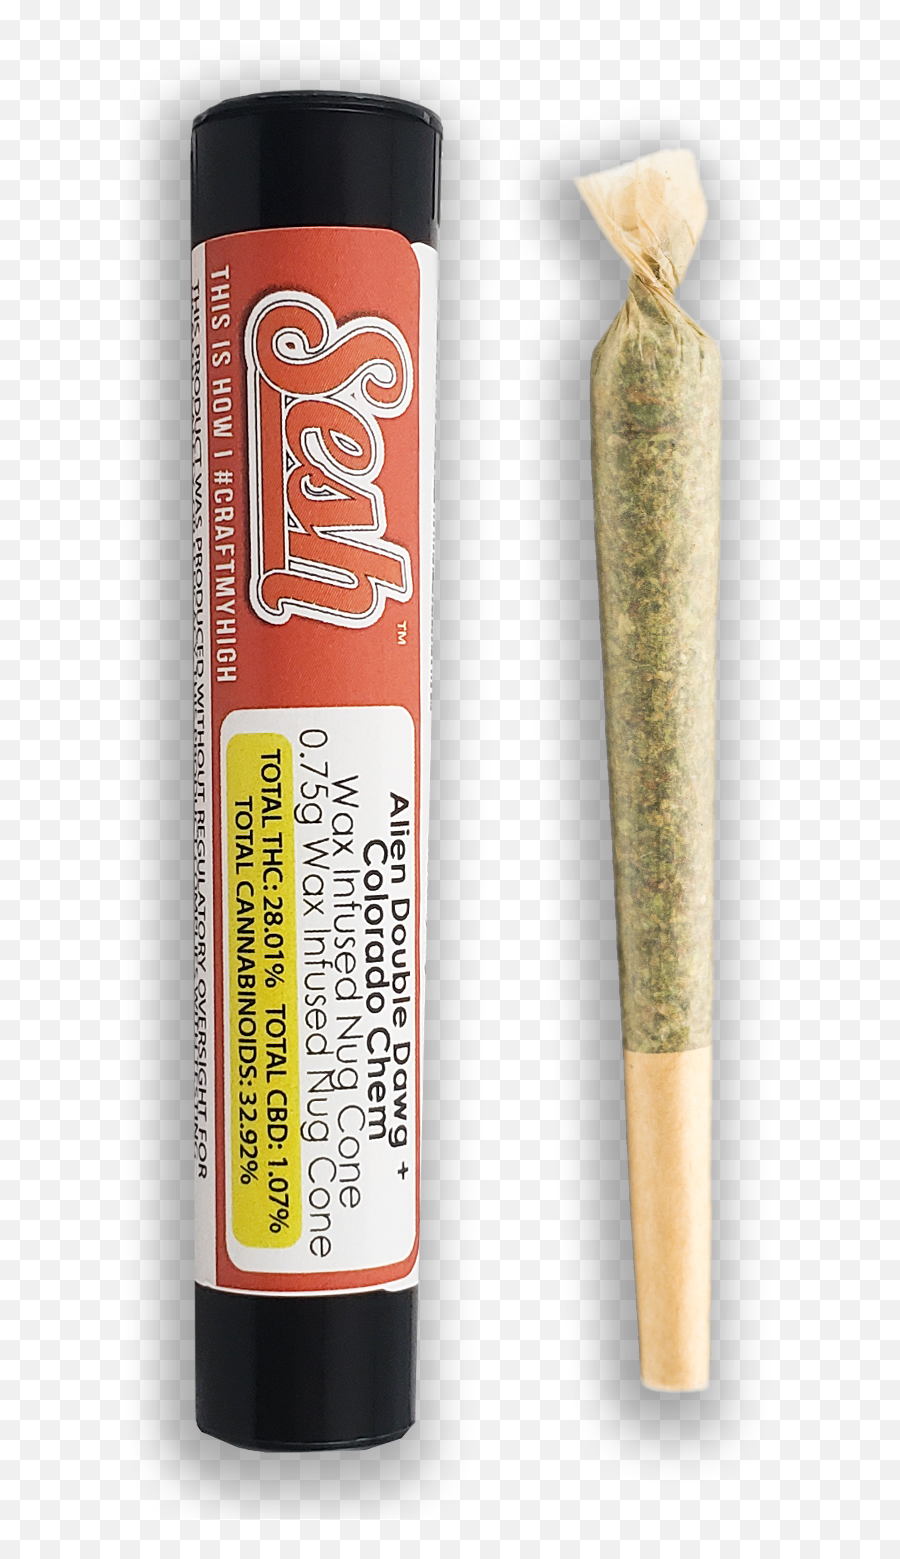 Sesh Craft Colorados Best Cannabis Emoji,Weed Joint Png